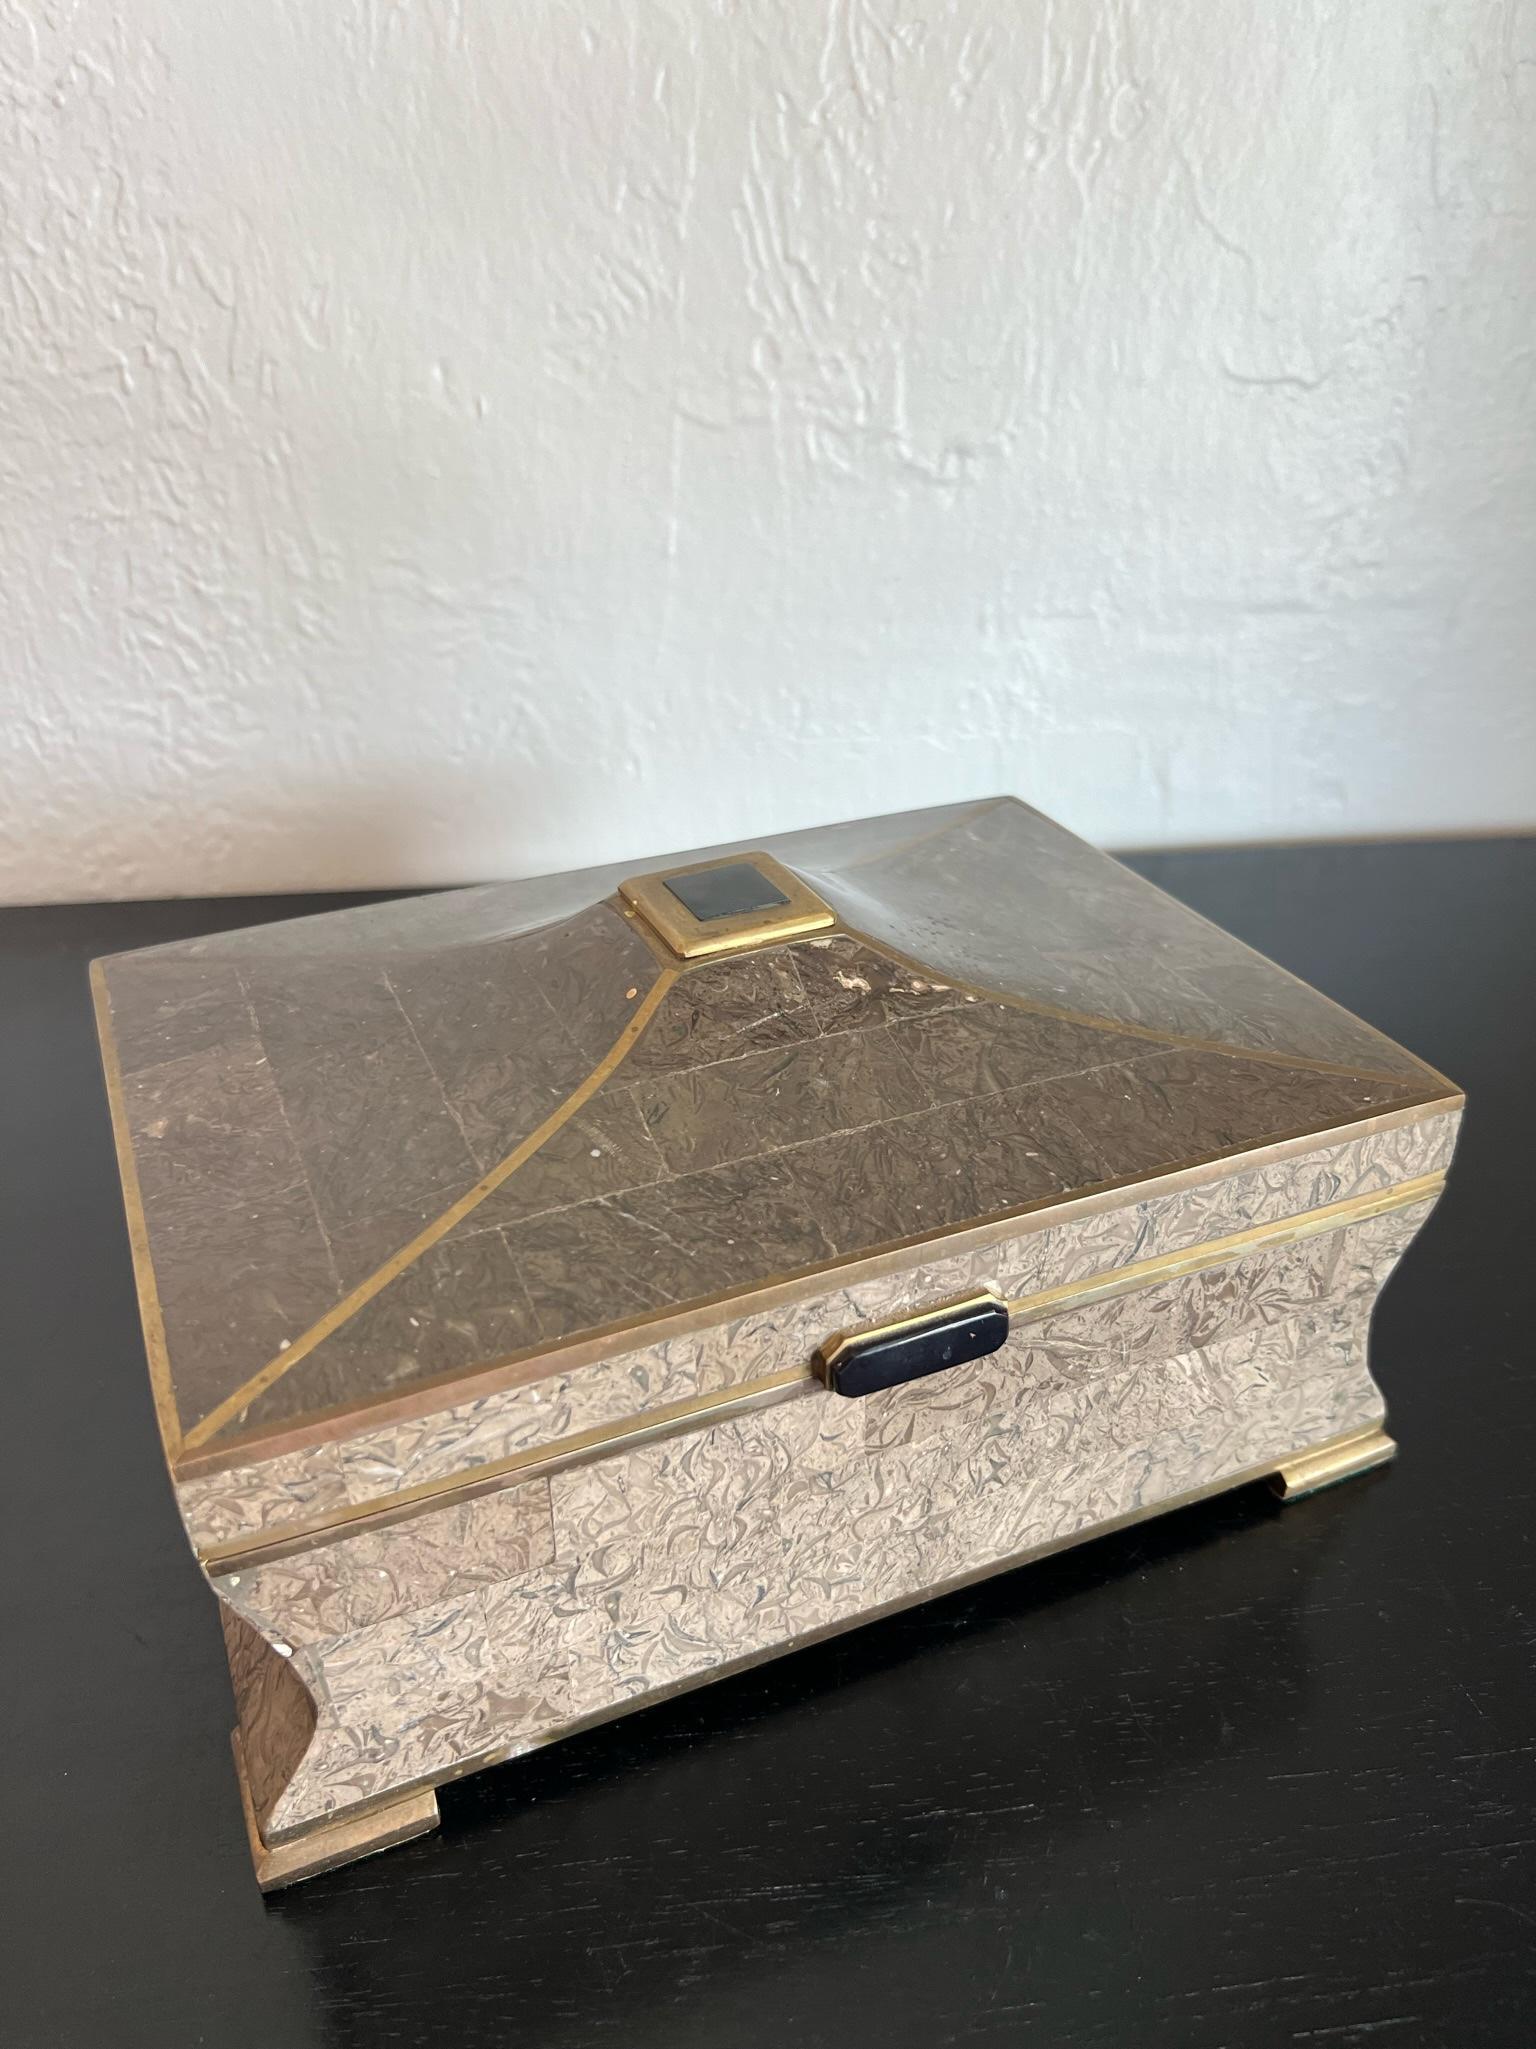 Karl Springer style tessellated stone and brass box. Mahogany lined interior with compartment for storage. Beautiful patina to the brass accents. 

Would work well in a variety of interiors such as modern, mid century modern, Hollywood regency,